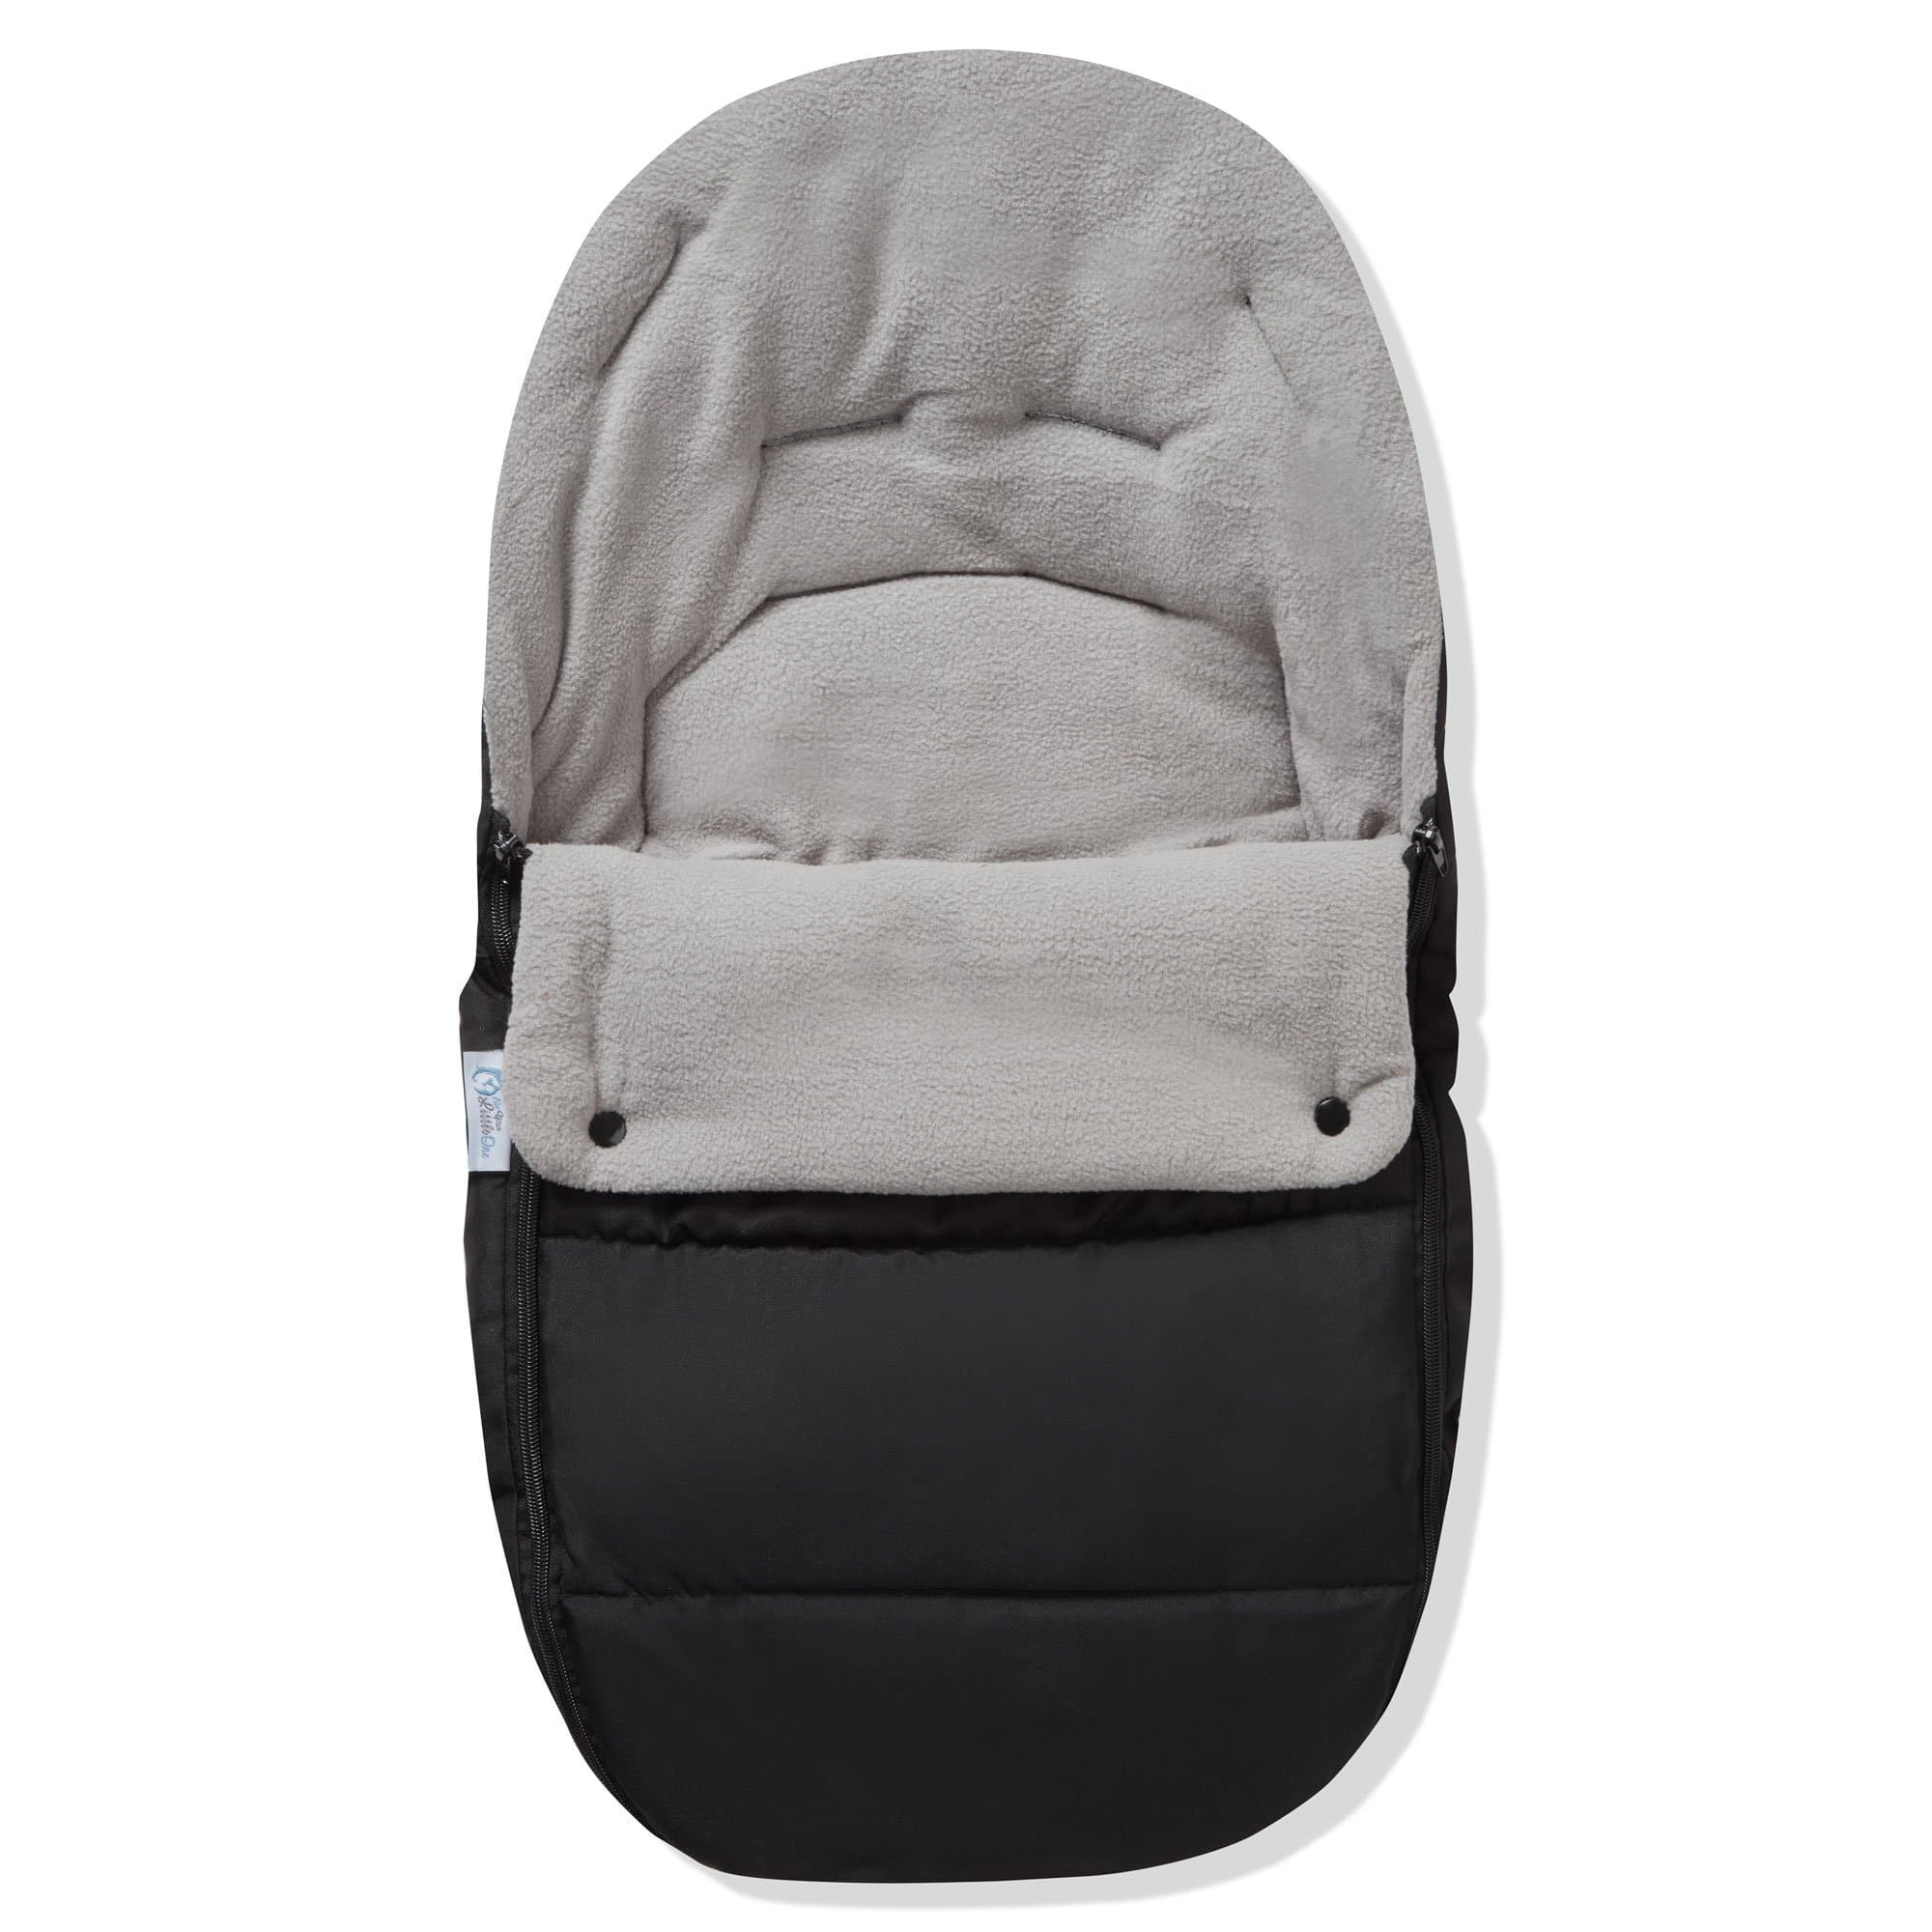 Premium Car Seat Footmuff / Cosy Toes Compatible with Kinderkraft - Dolphin Grey / Fits All Models | For Your Little One